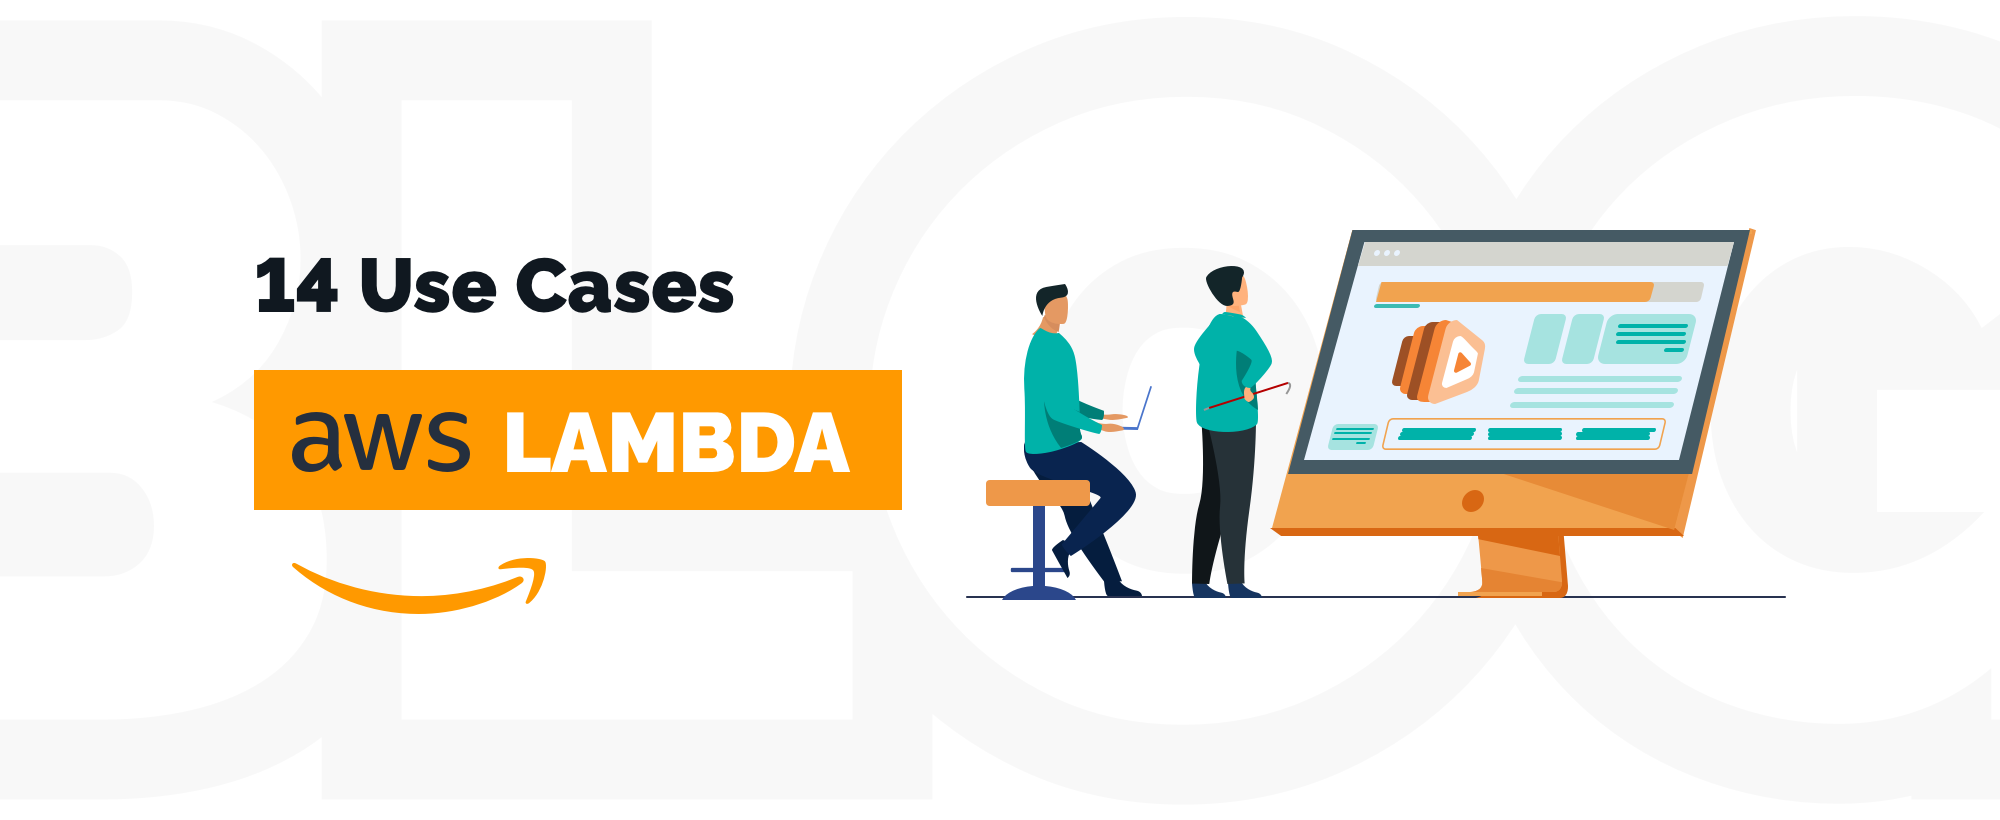 14 Use Cases for AWS Lambda: How to Make the Most of It